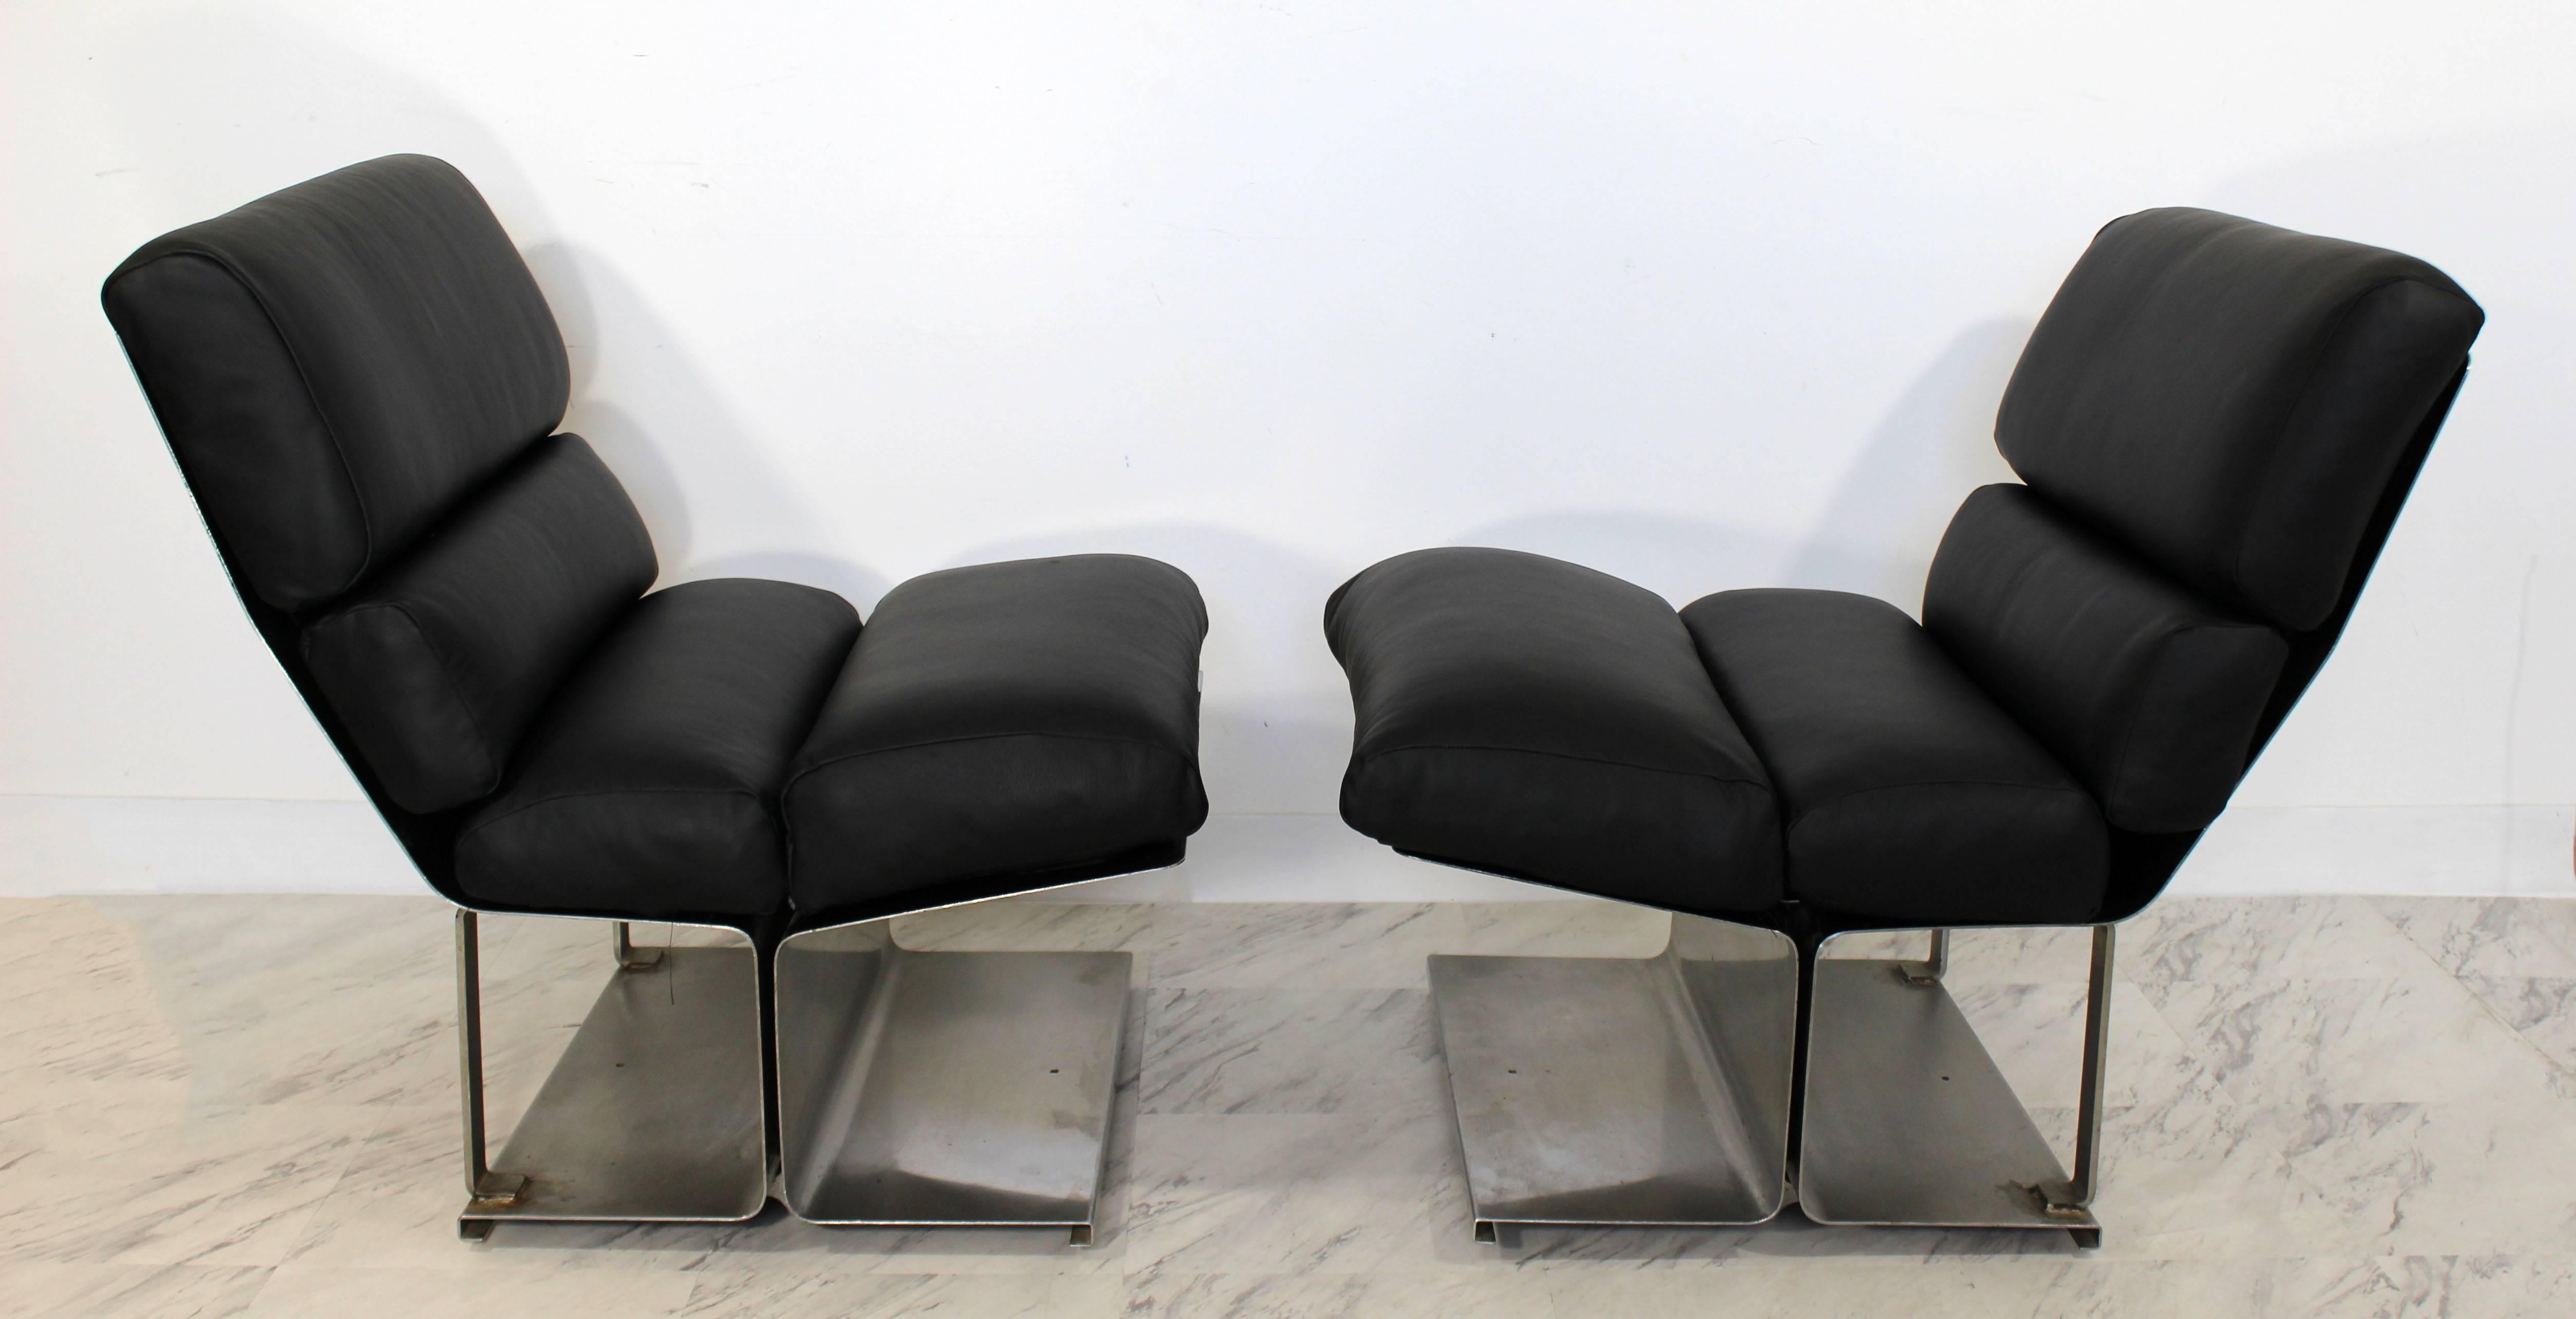 For your consideration is a magnificent pair of steel and black leather hide lounge chairs by Paul Geoffroy by Uginox, France in the 1970s. Just back from being professionally reupholstered in the finest black leather hide. In excellent condition.